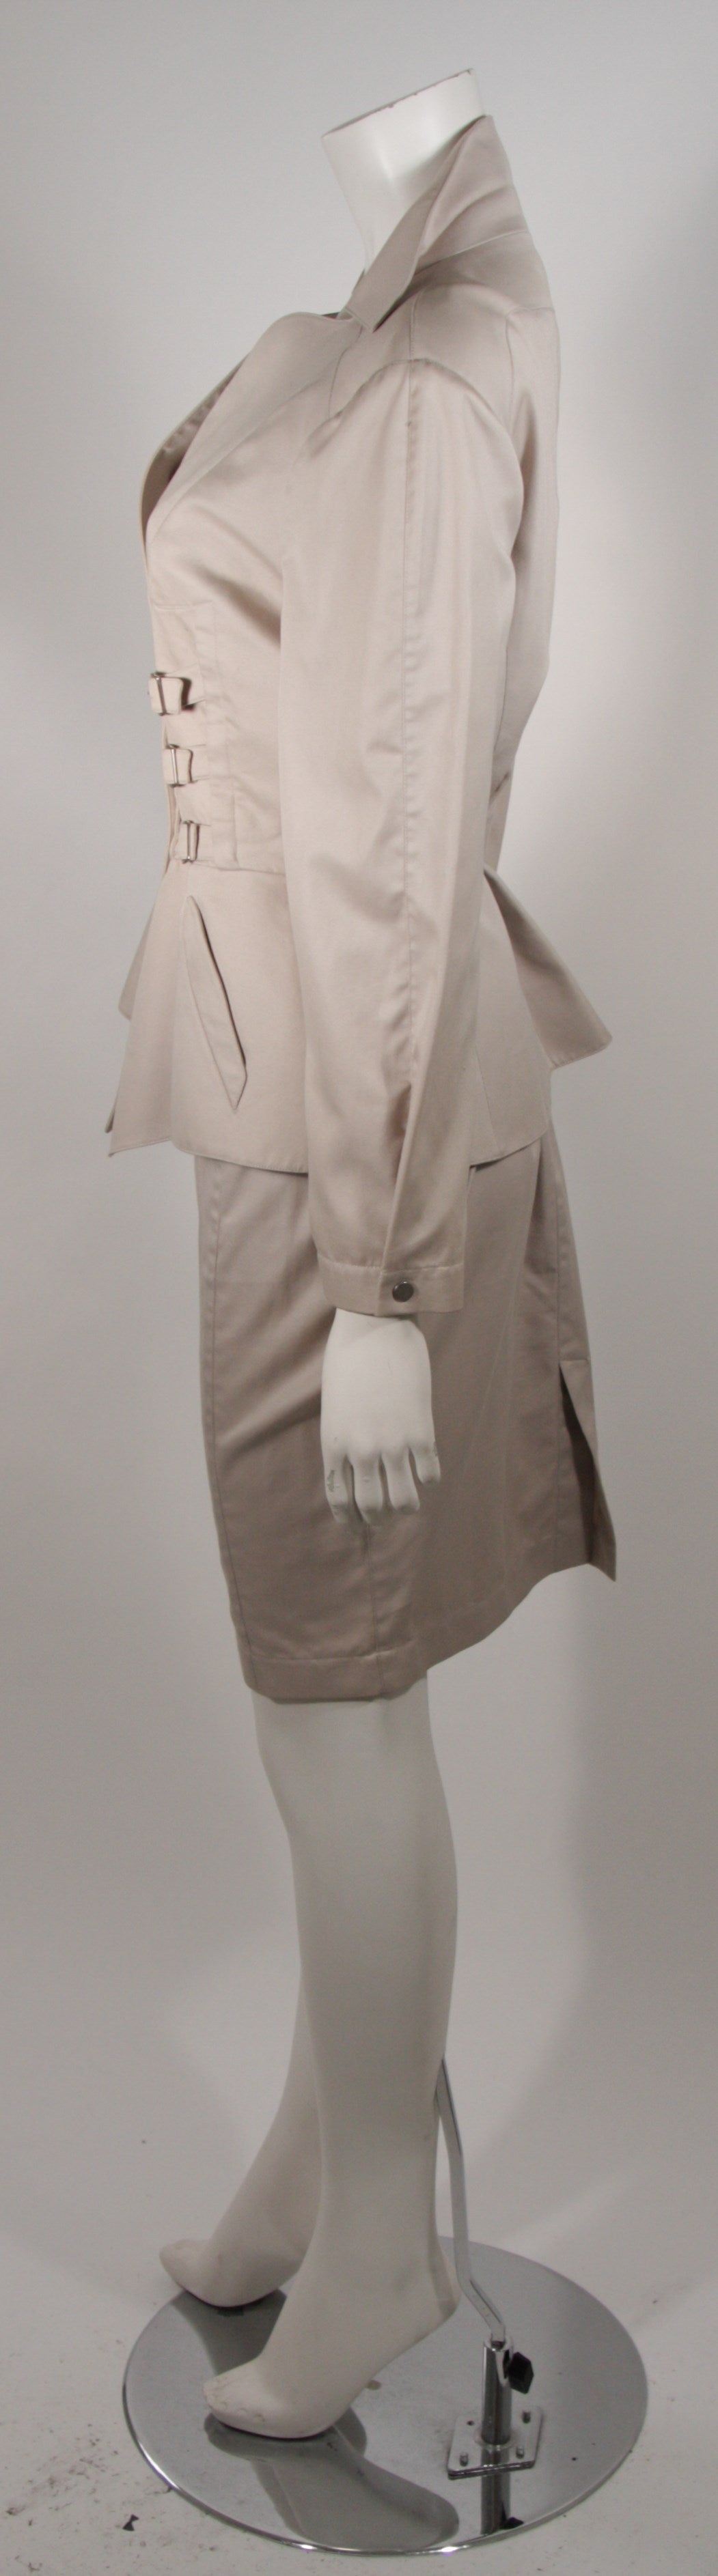 Thierry Mugler Khaki Military and Safari Style Suit Size 40 In Excellent Condition For Sale In Los Angeles, CA